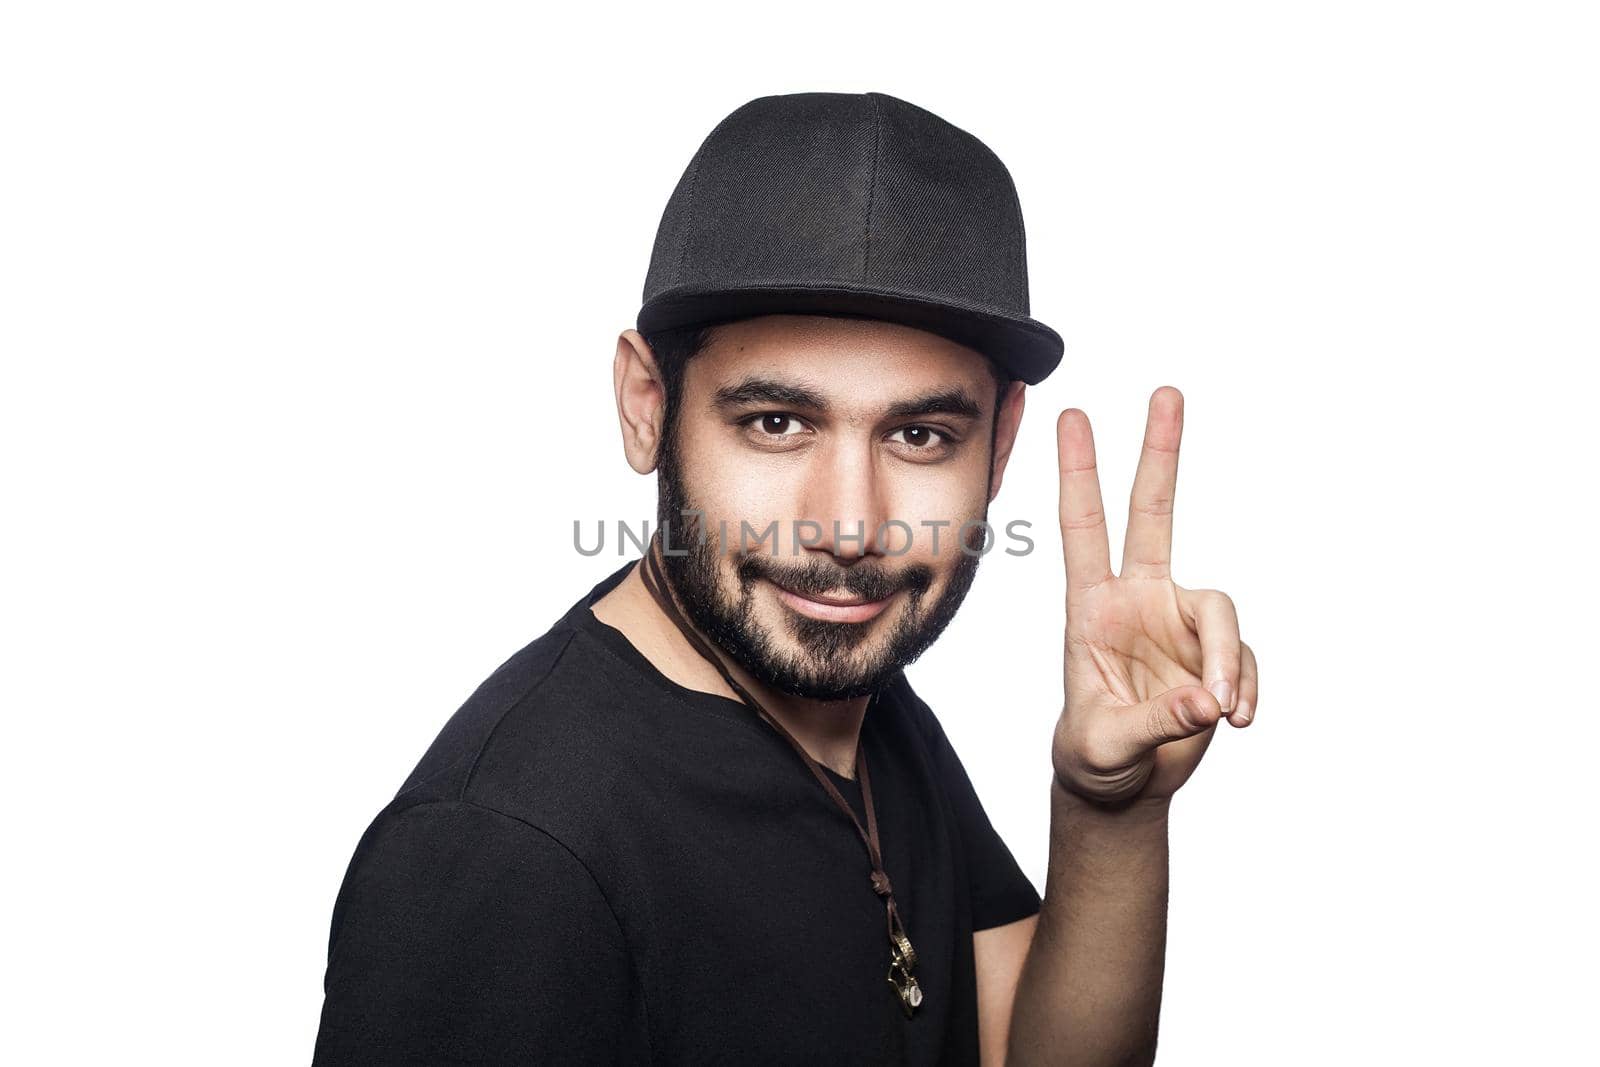 Portrait of young man with black t-shirt and cap looking at camera with victory sign. studio shot, isolated on white background.